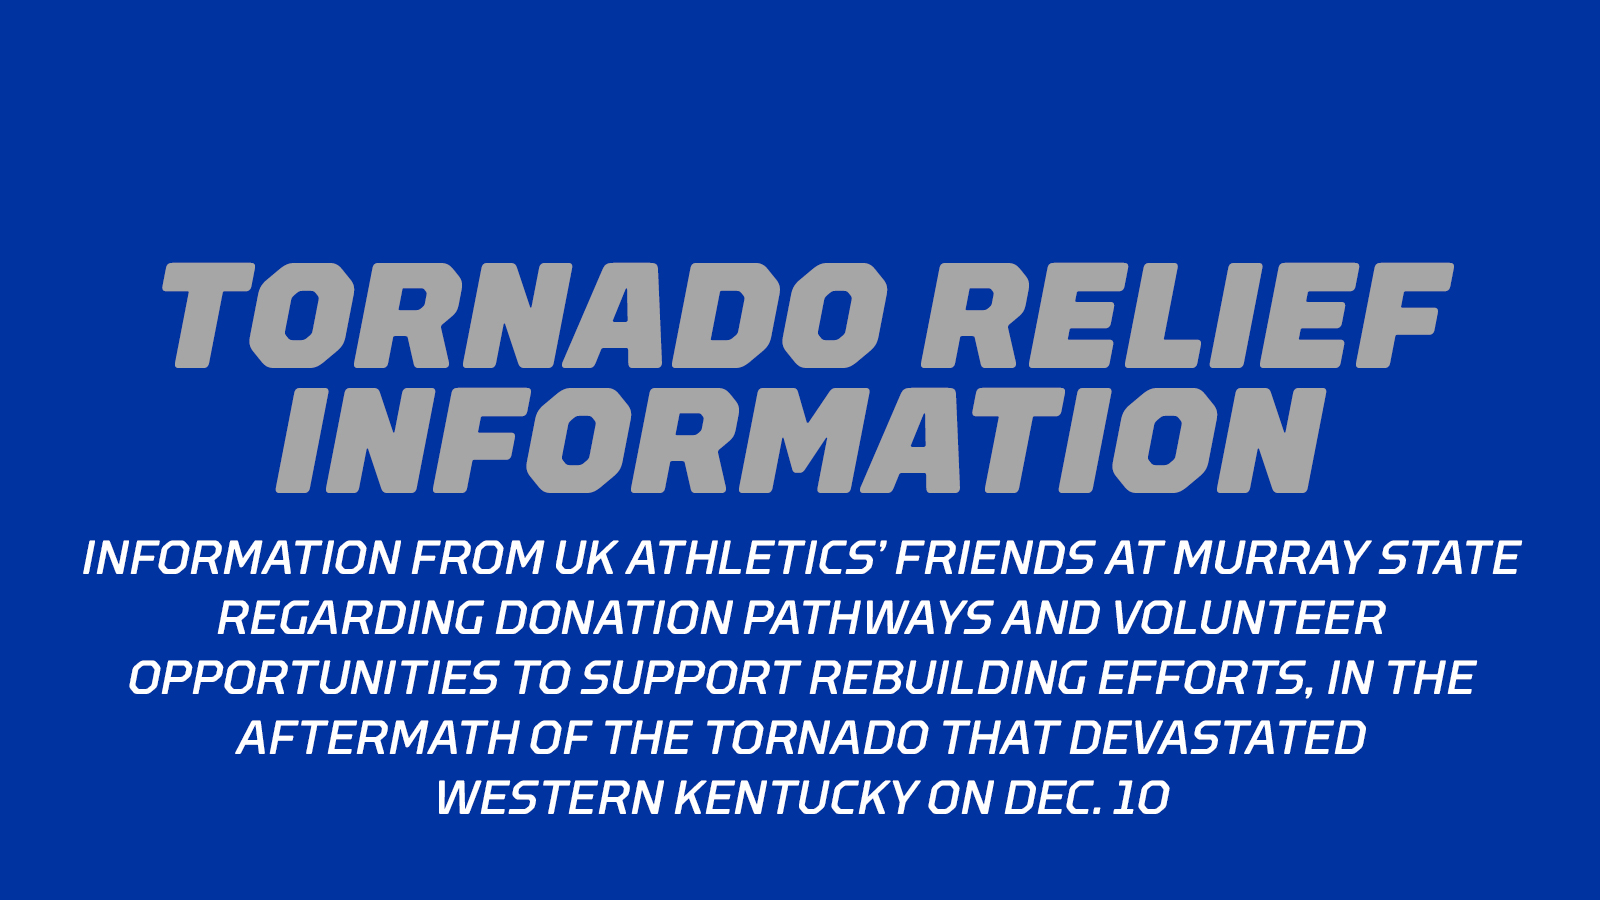 Tornado Relief Information from Murray State Athletics